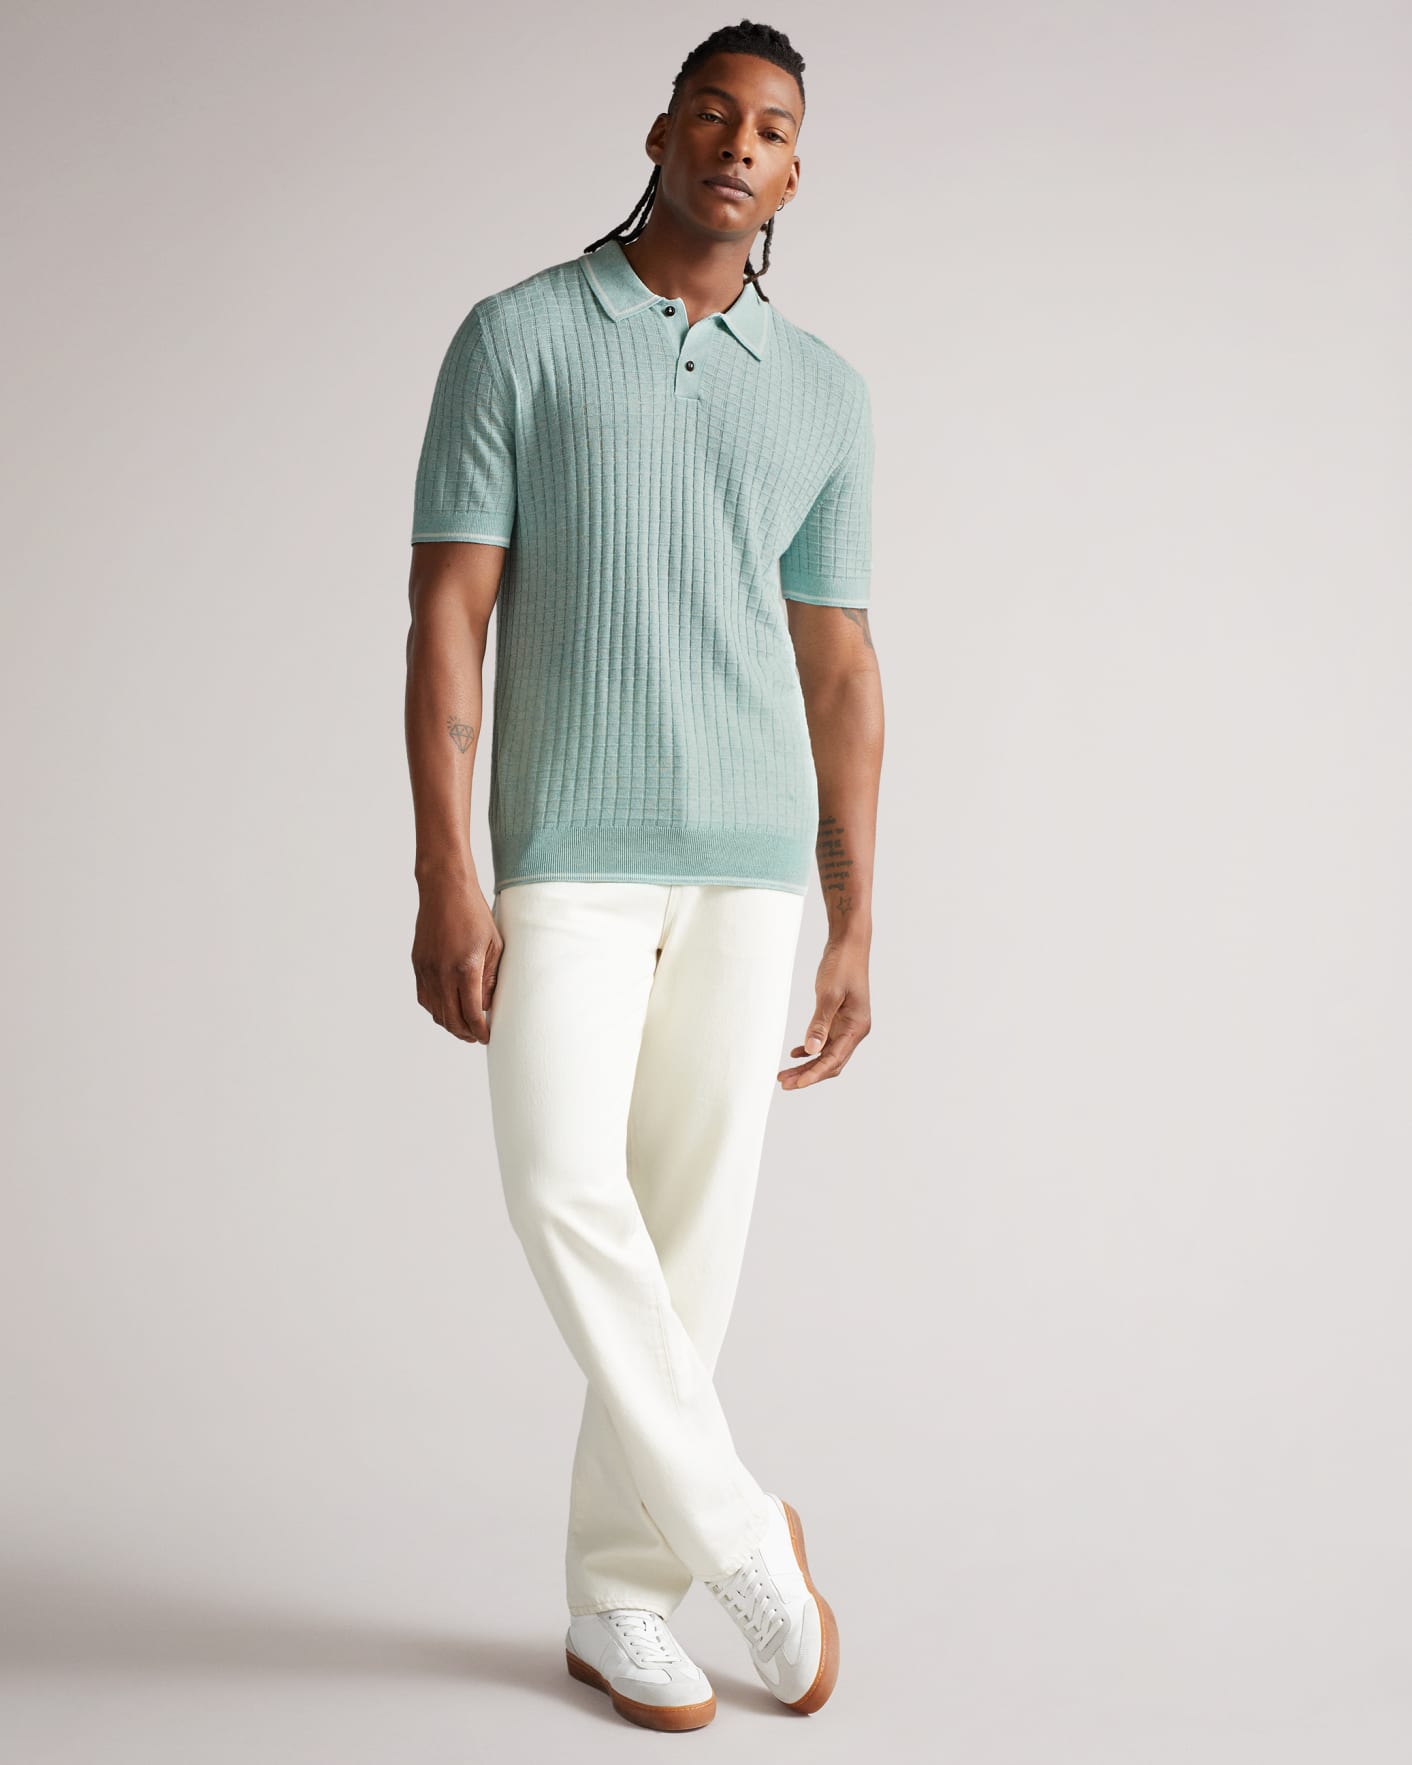 Sky Blue Knitted Stitch Polo Shirt Ted Baker